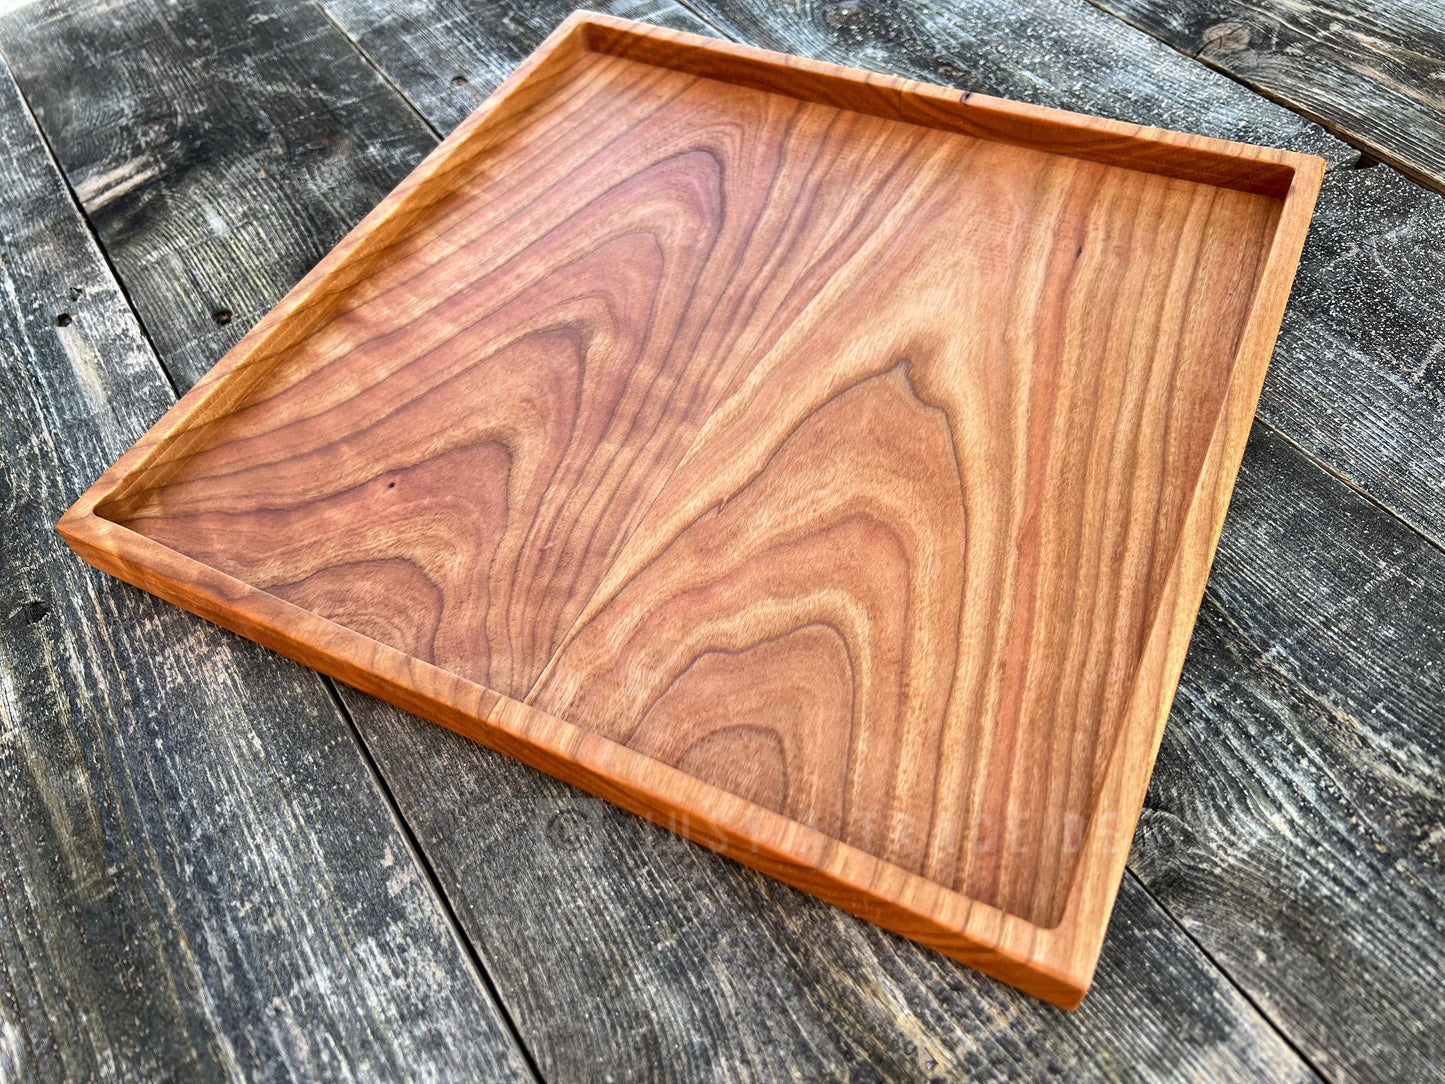 12" Square Cherry Tray, Grazing Board, Charcuterie Board, Coffee Table, Ottoman Tray, Wood Platter, Serving Tray, Wood Dish, Handmade Gift